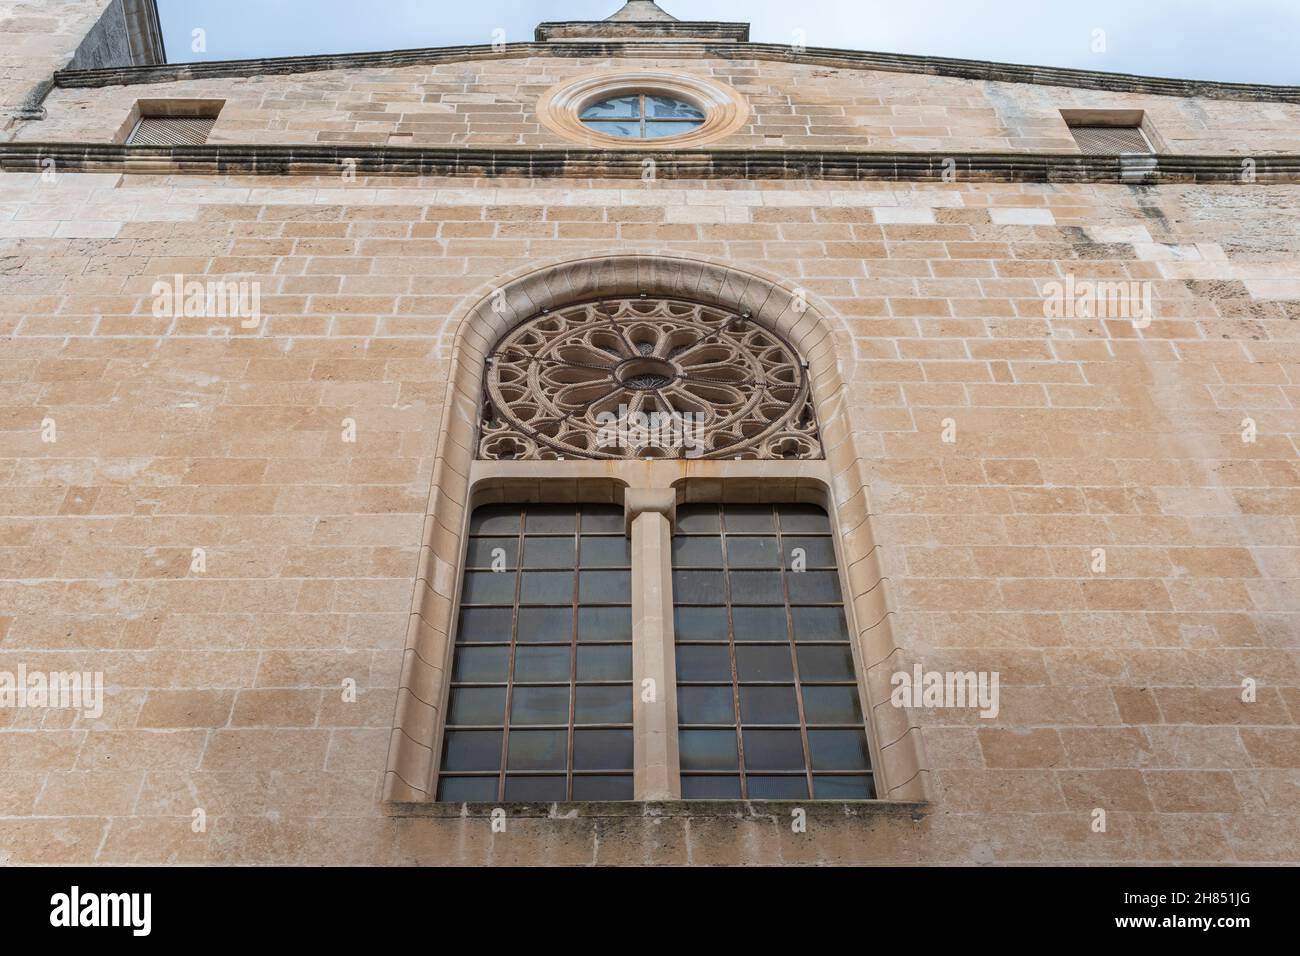 Main facade of the Christian convent of San Vicente Ferrer in the Majorcan town of Manacor Stock Photo